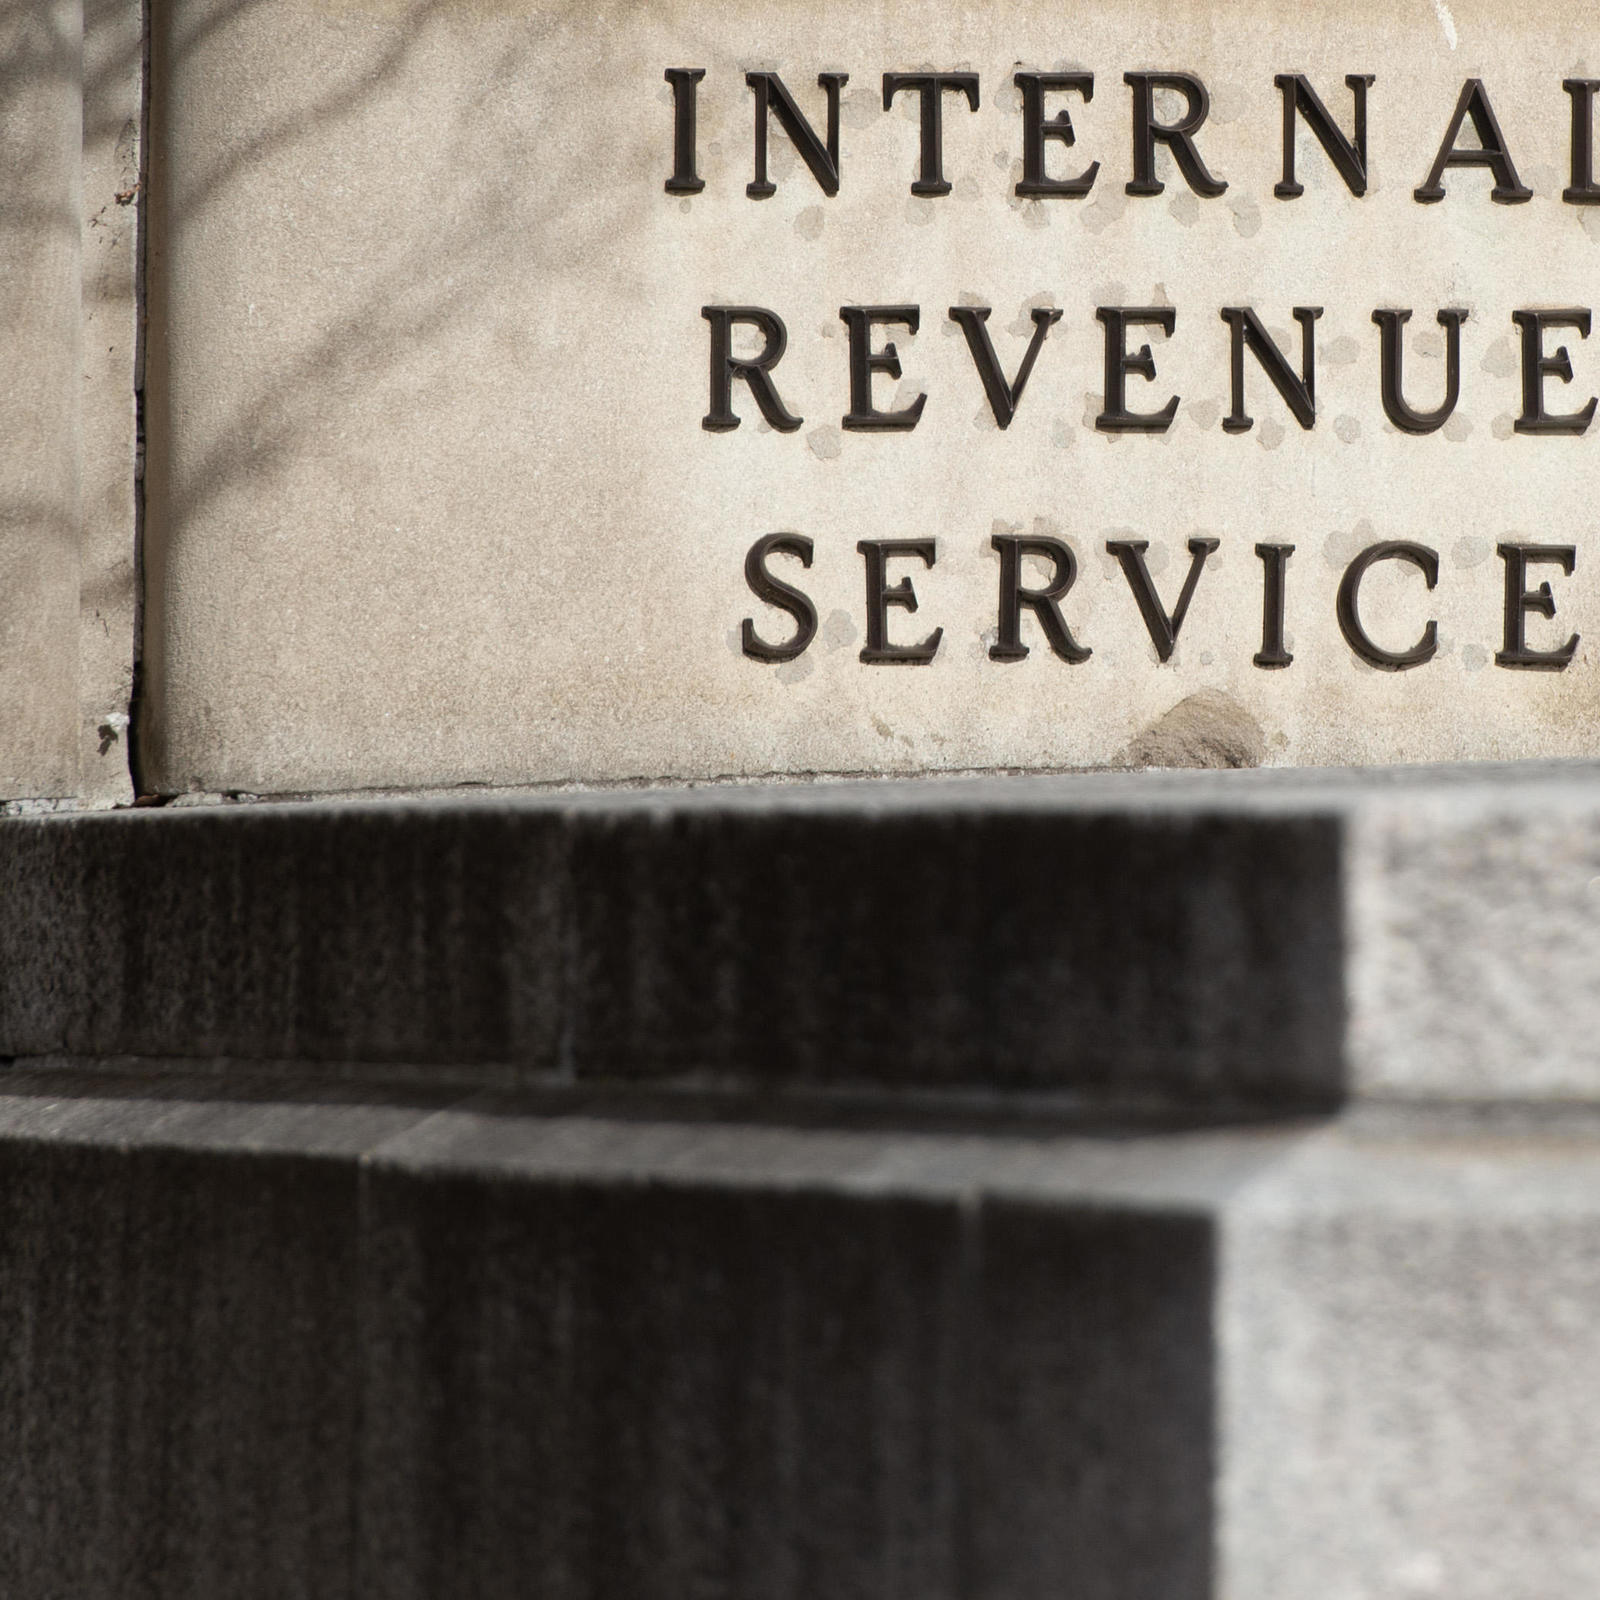 irs-warns-of-new-tax-refund-scam